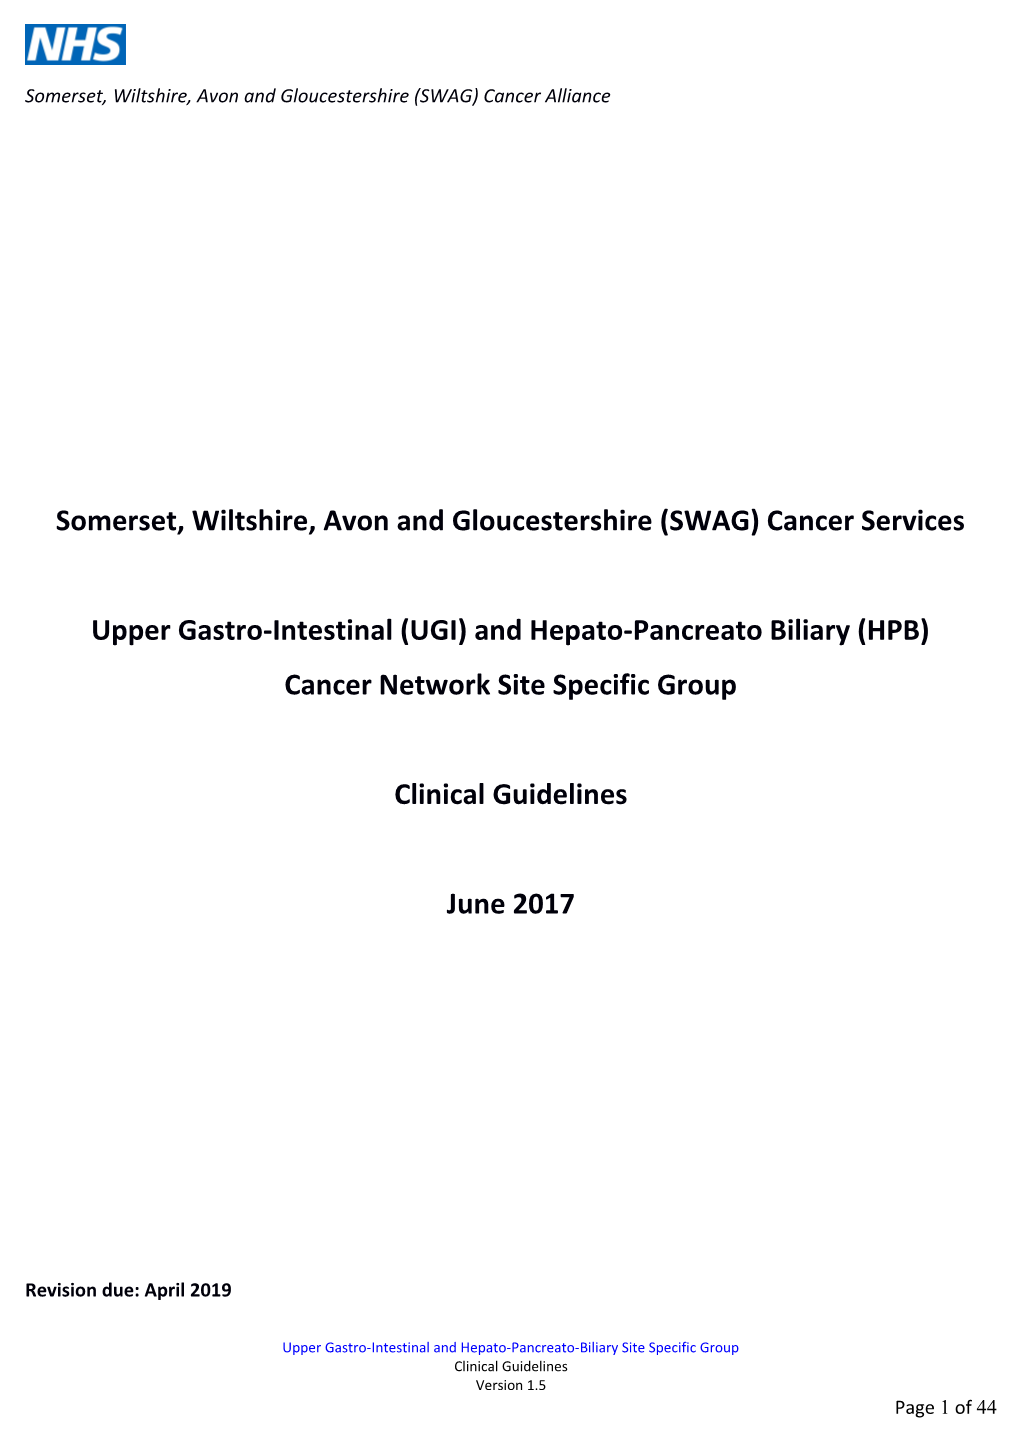 Somerset, Wiltshire, Avon and Gloucestershire (SWAG) Cancer Services